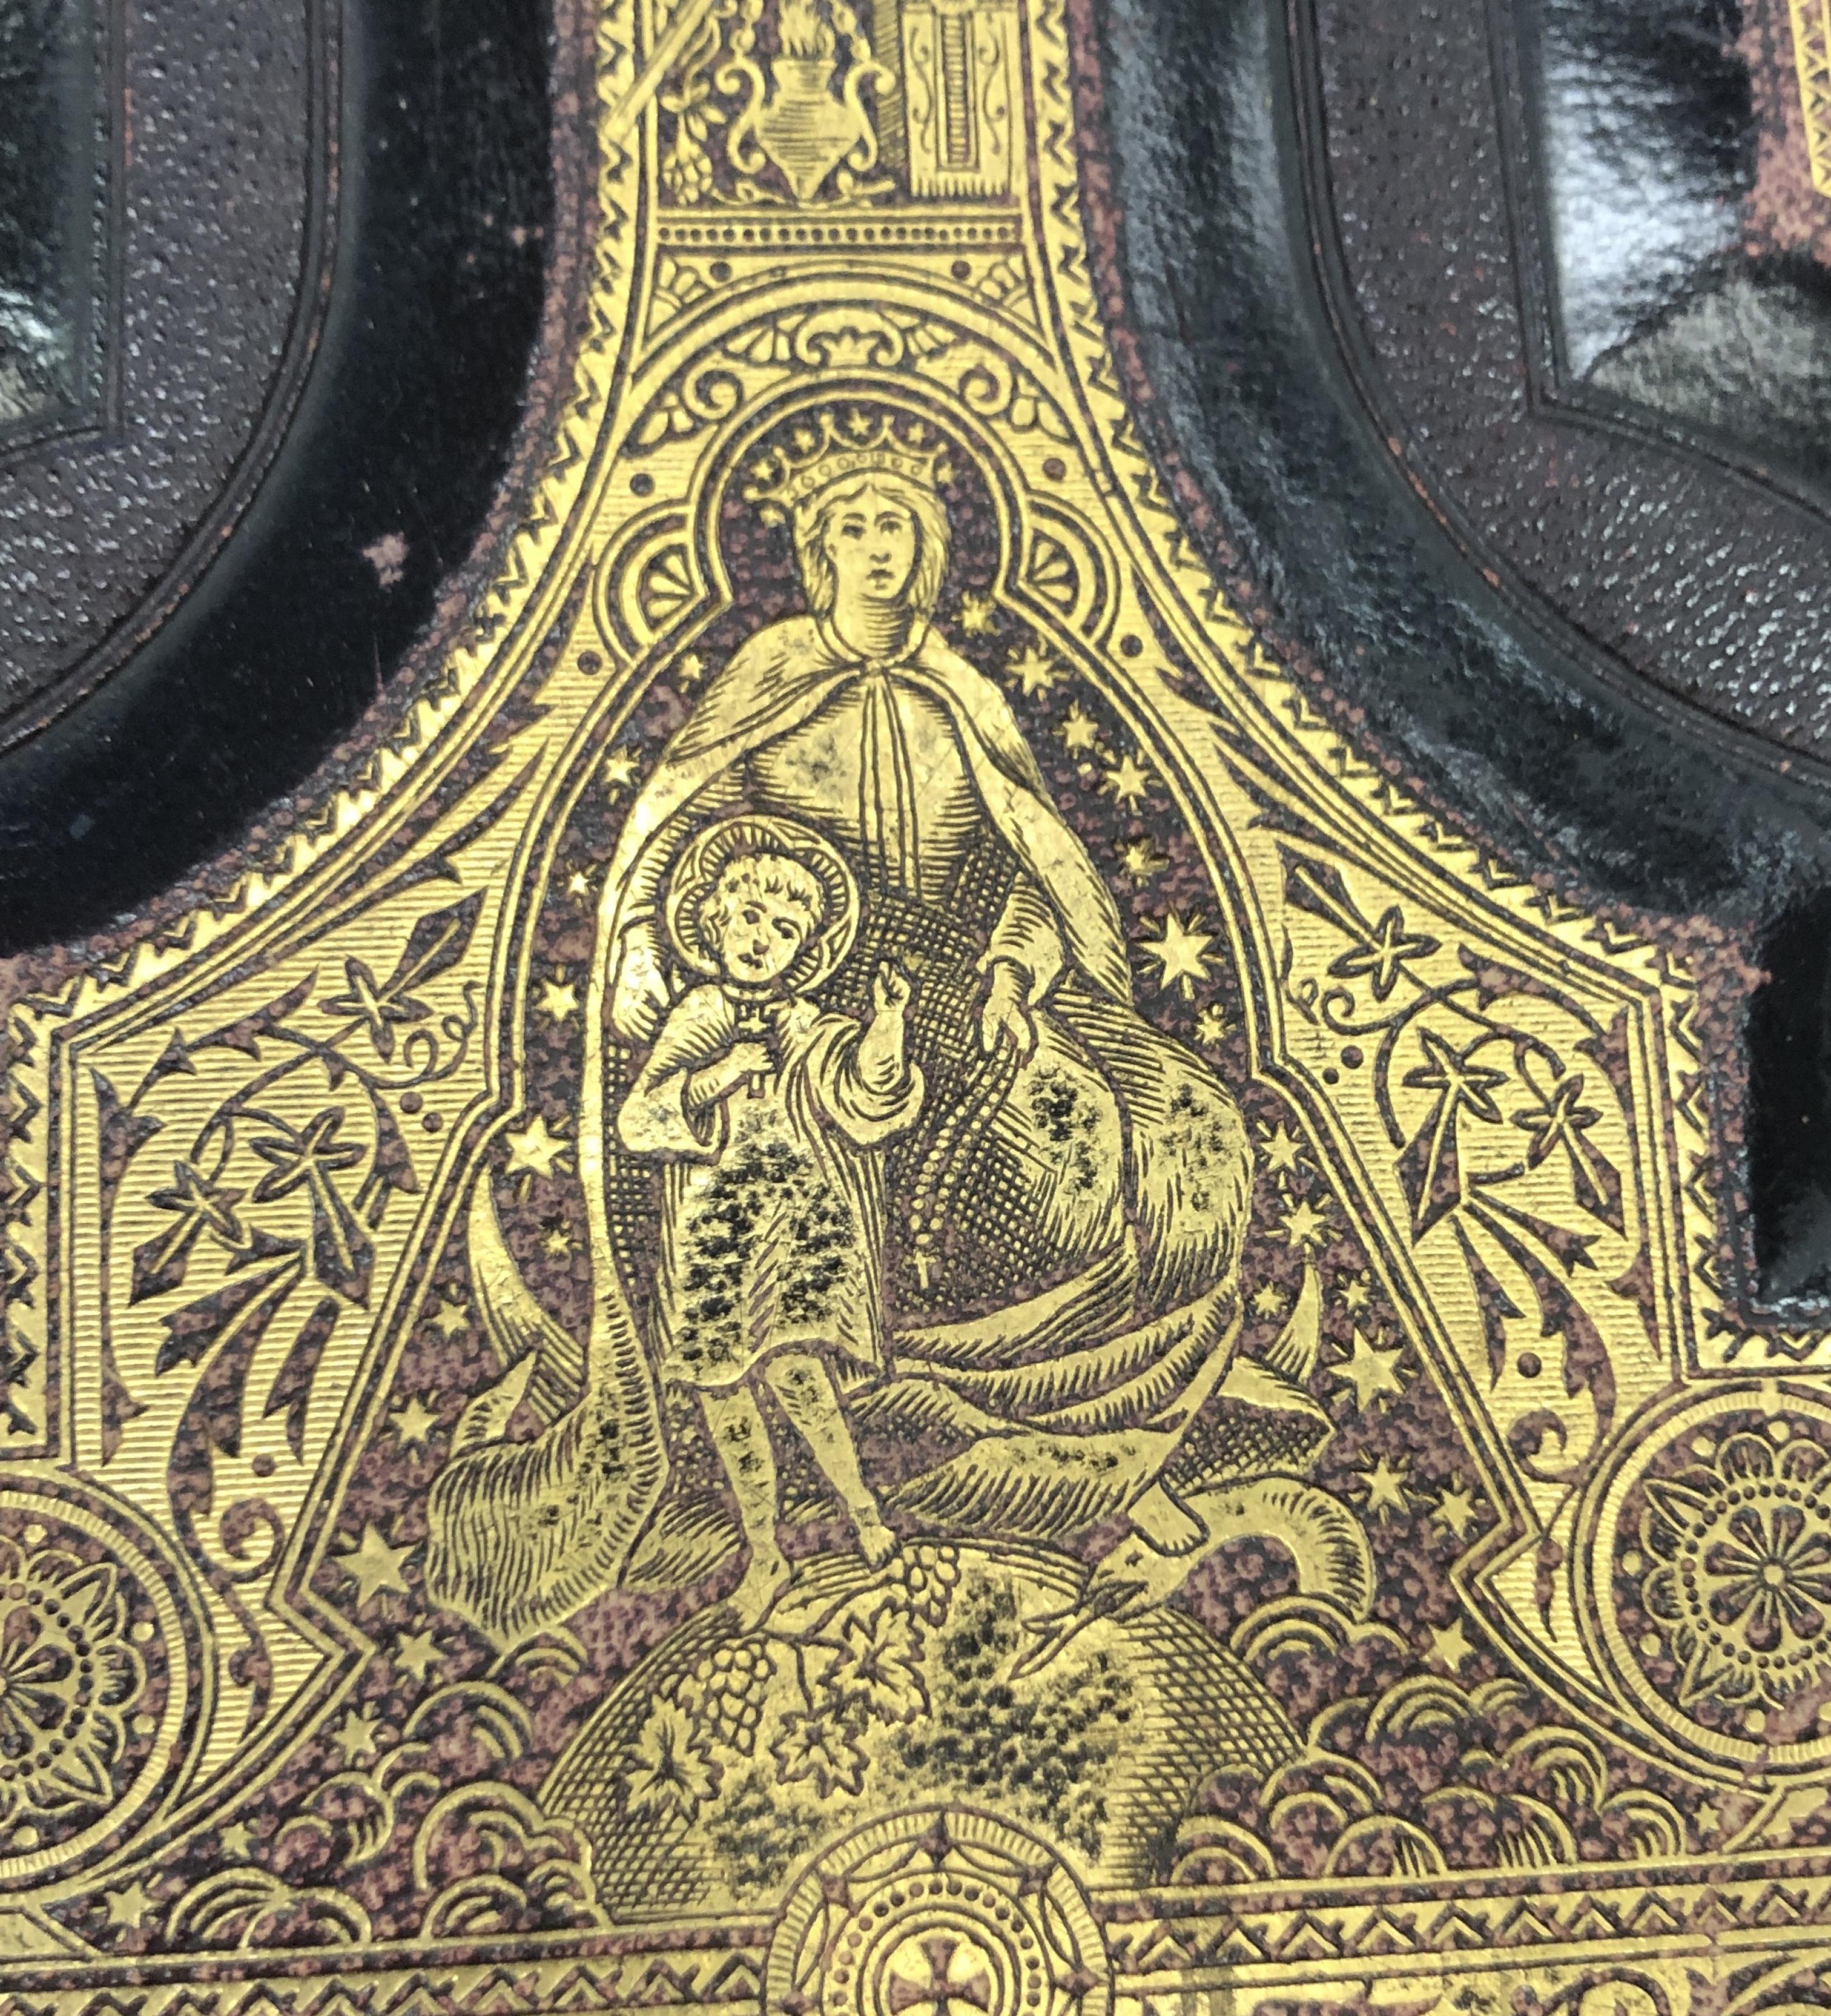 Although the Bible is a gigantic, weighty object, it still bears fine details like this gilt Mary and Jesus. 